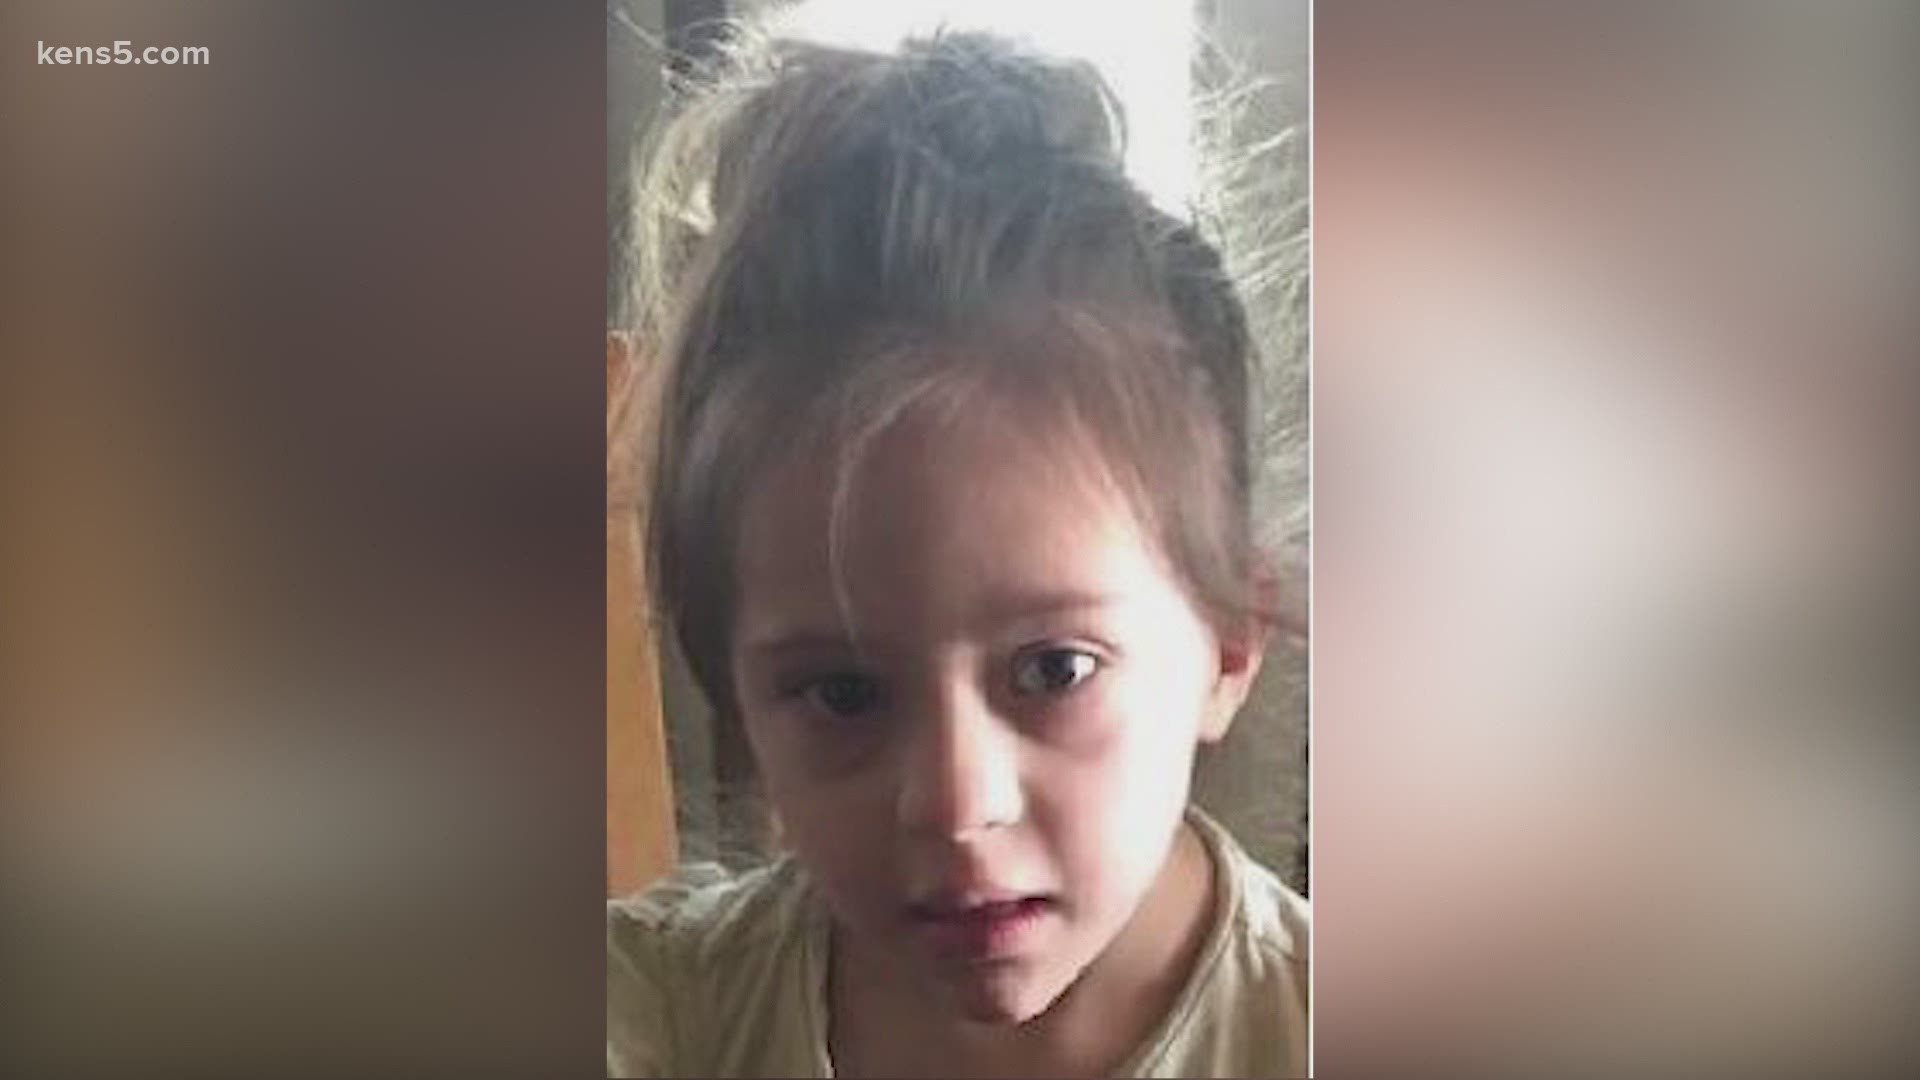 Authorities say Molly Rubio was supposed to have been transferred to Child Protective Services custody. Instead, her biological mother took her.